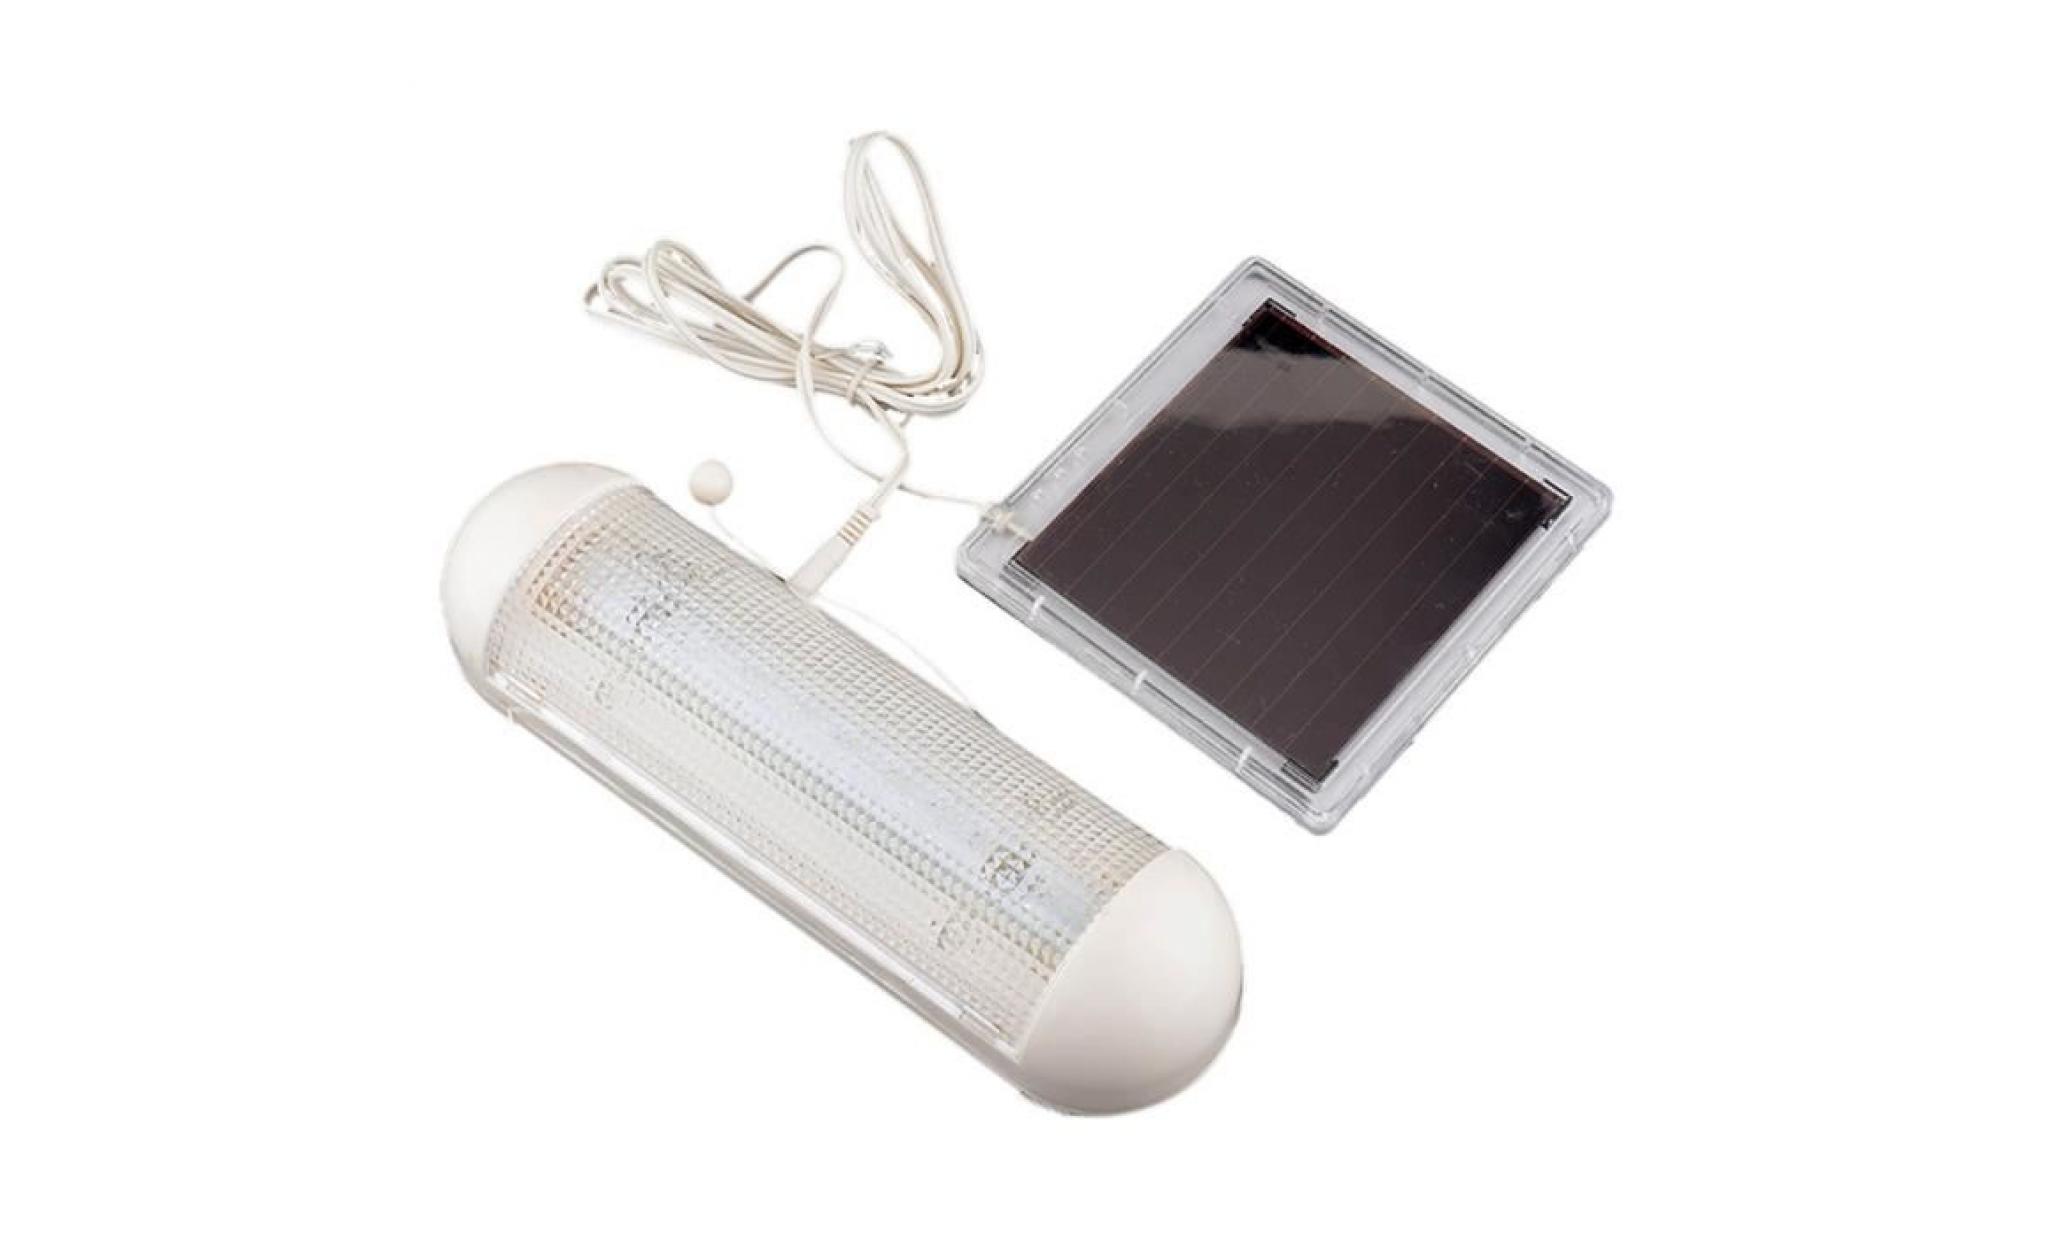 lumière populaire pull solaire fractionner lampes solaires intérieur 5 led extérieur lumière d'urgence anonywego927 pas cher